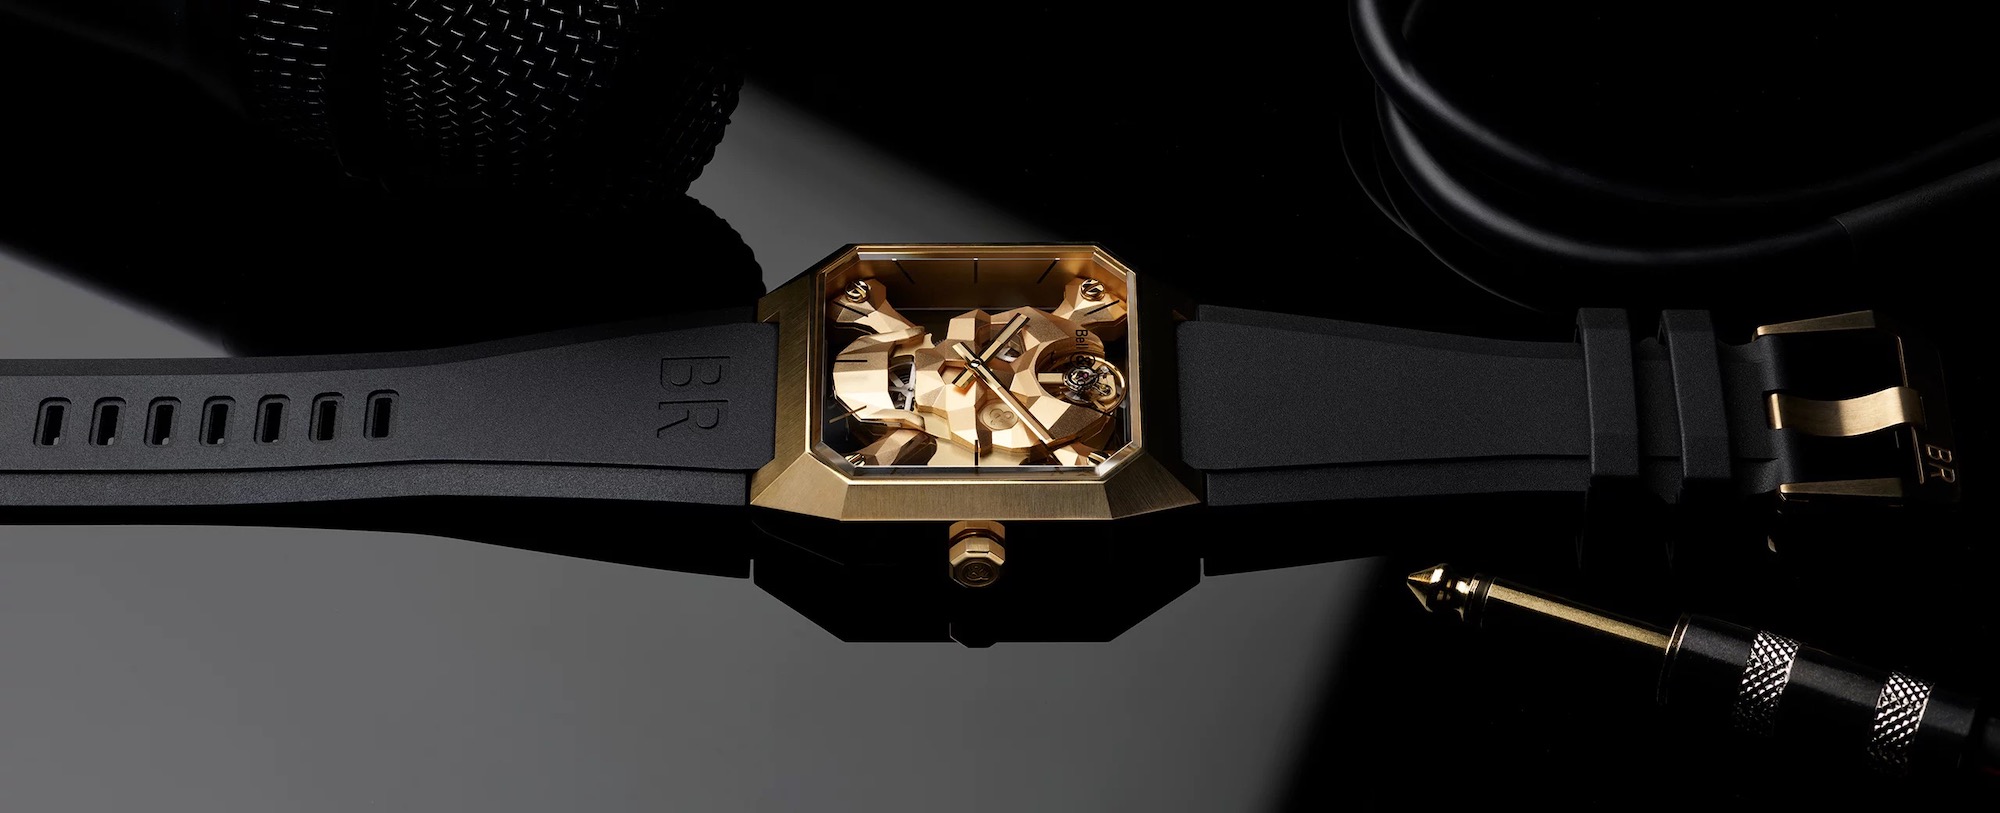 Bell & Ross BR 01 Cyber Skull Bronze Limited Edition BR01-CSK-BR:SRB Lifestyle